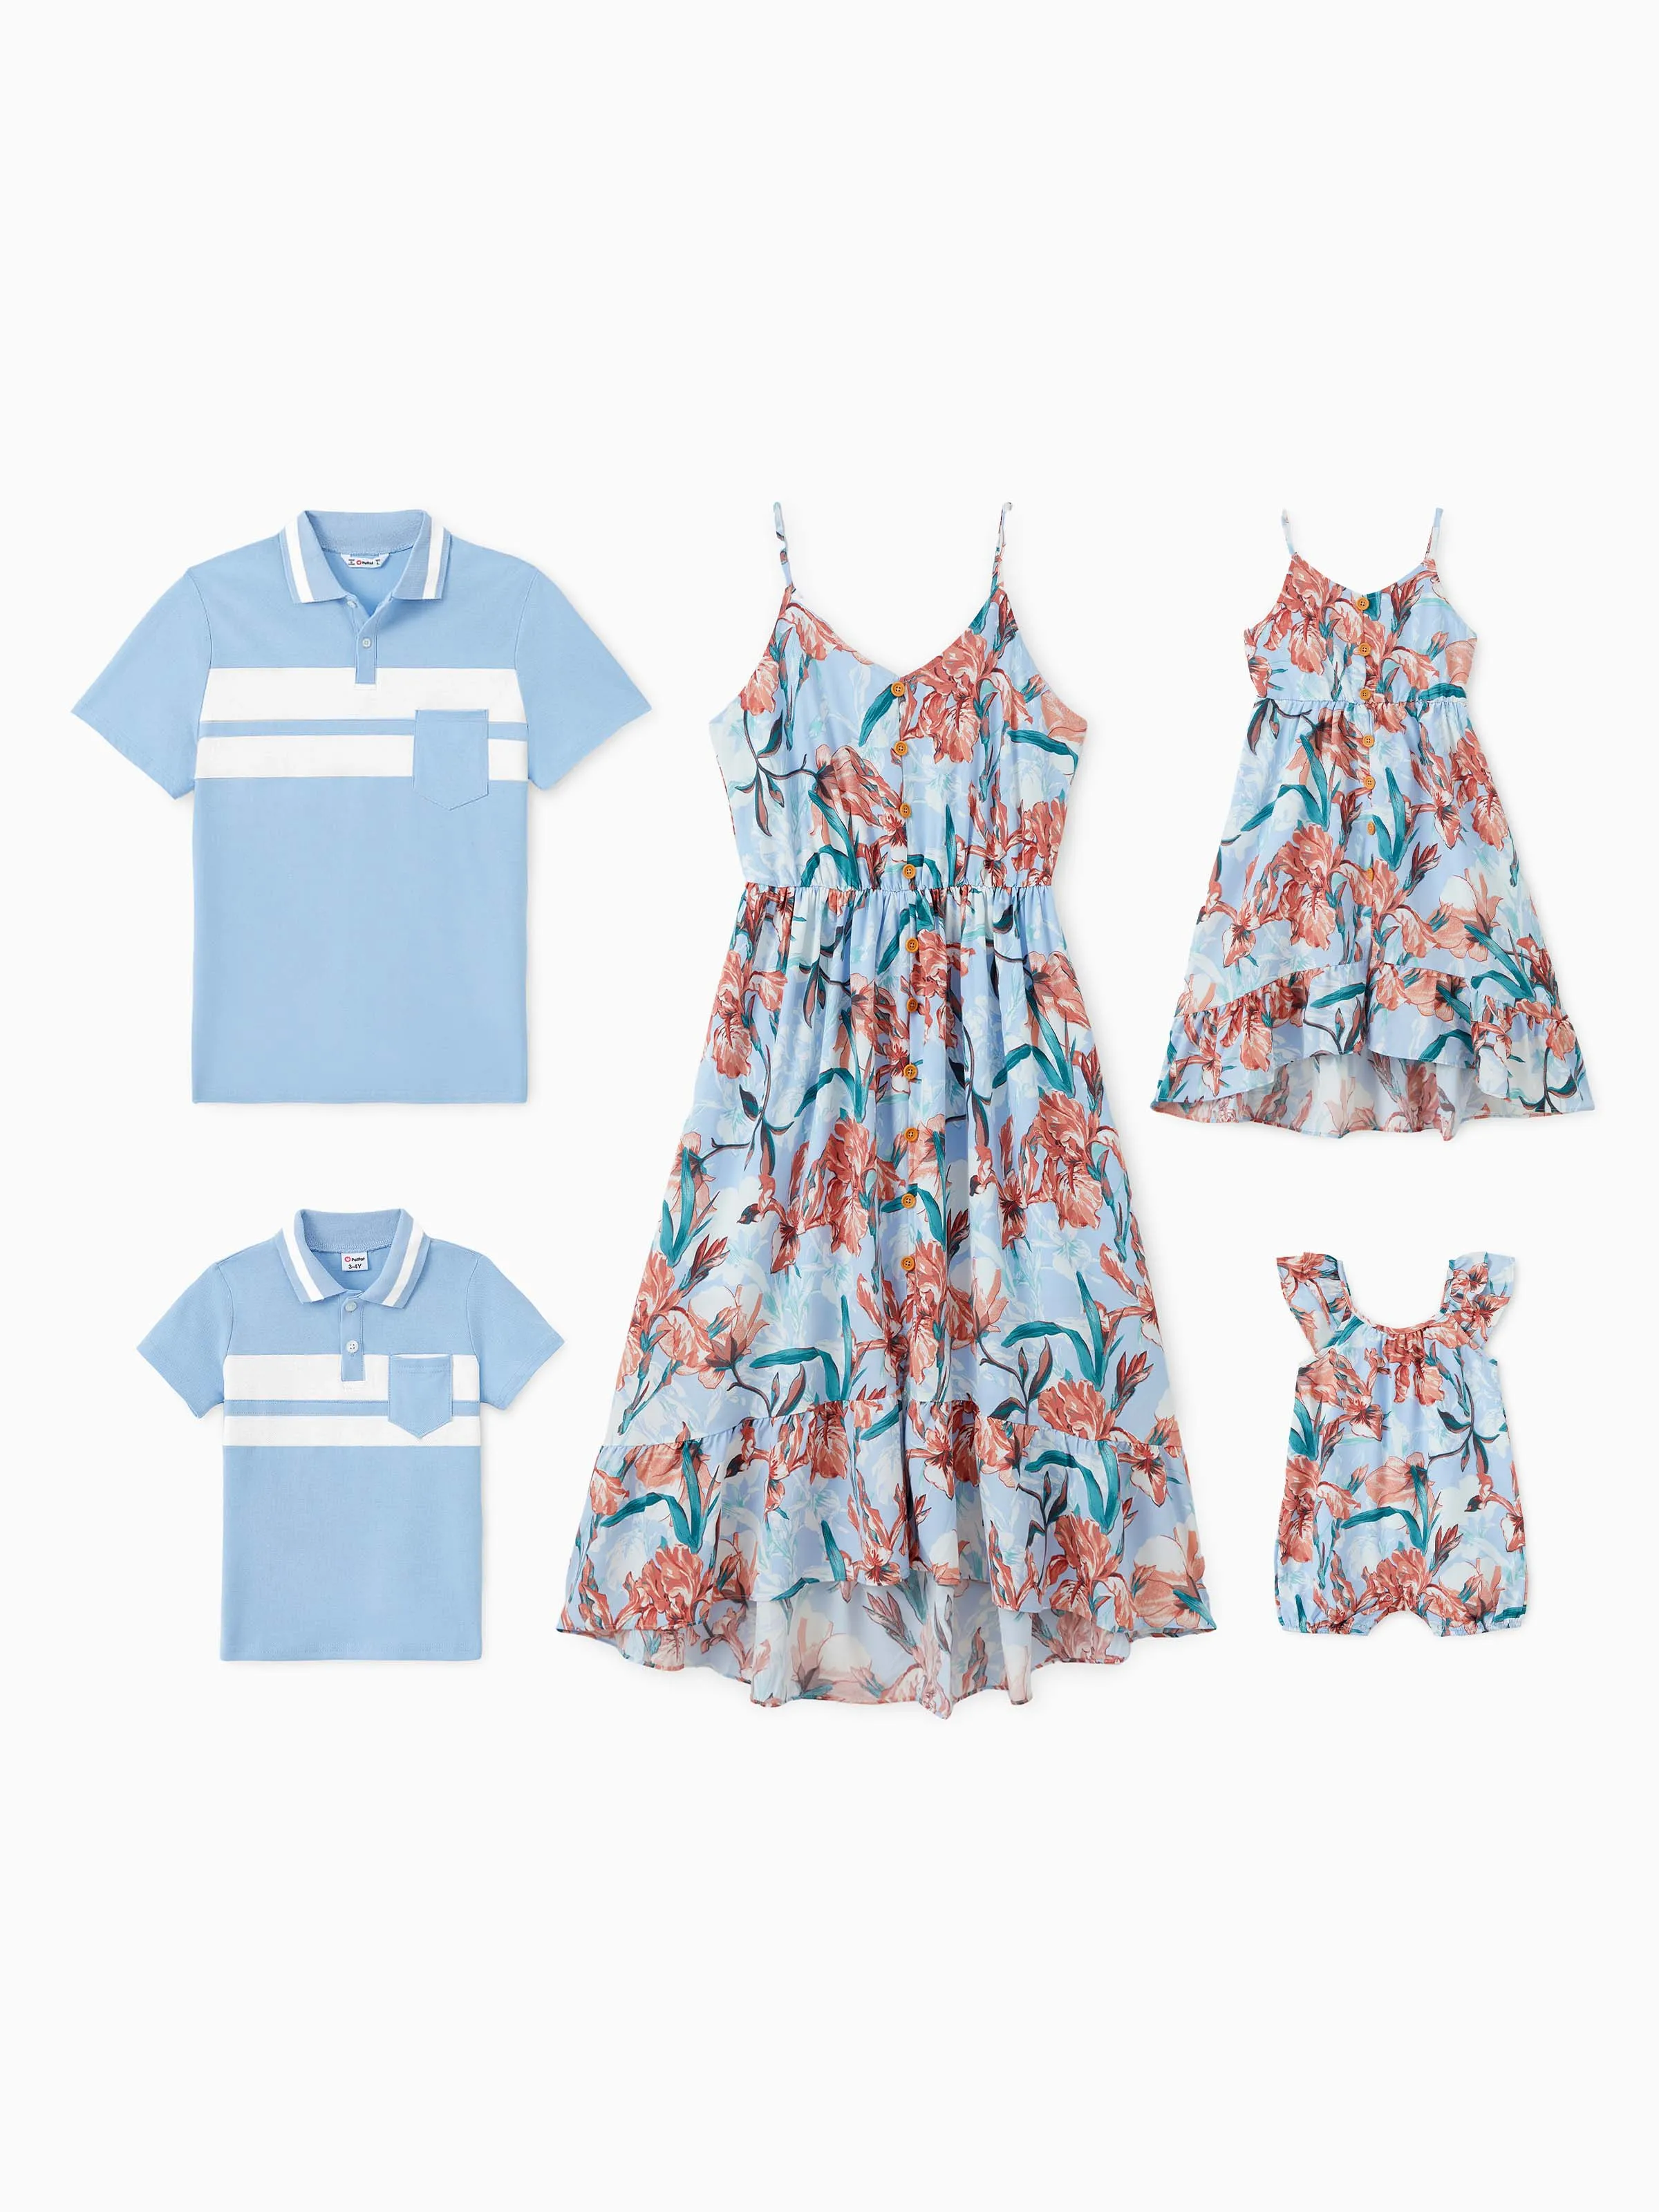 

Family Matching Color Block Polo Shirt or Button Up Elastic Waist Vibrant Floral Strap Dress